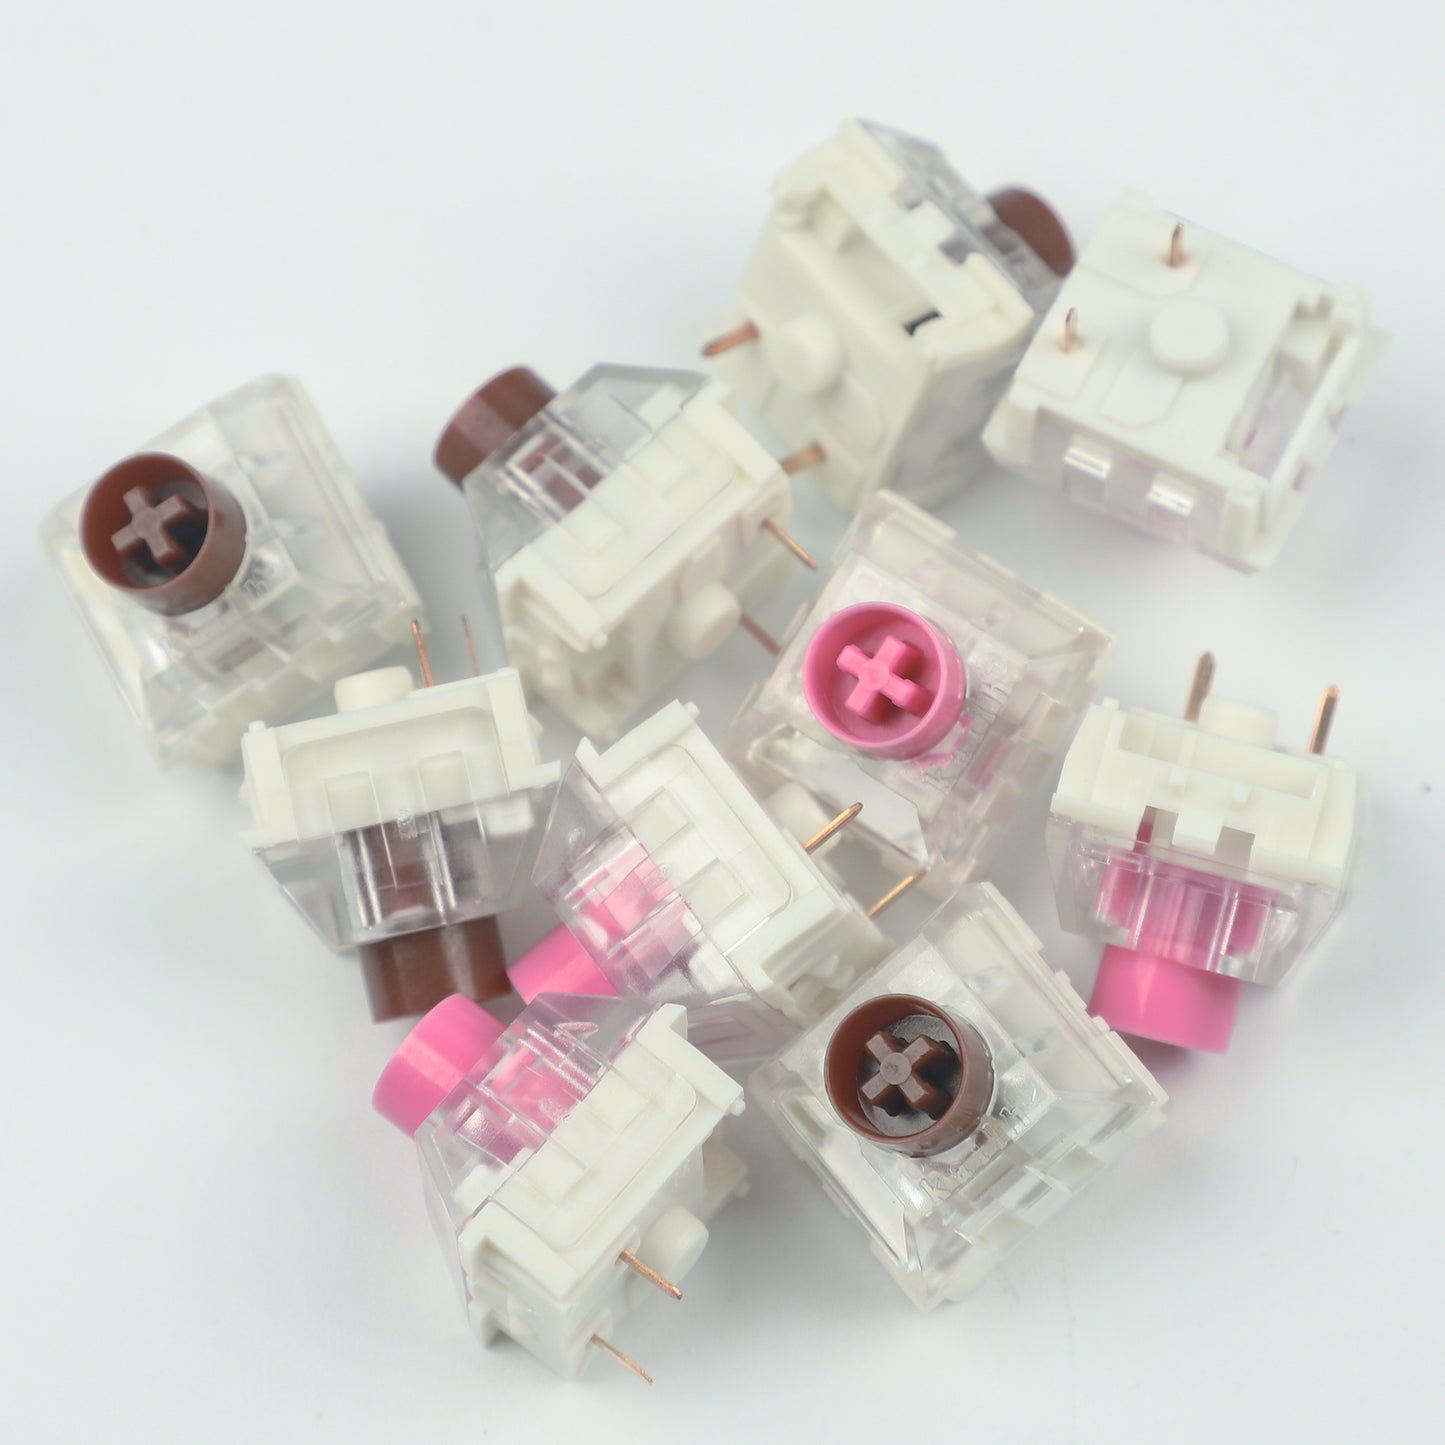 Kailh Box Silent Brown Or Pink(SMD 3 Pin Switches/IP56 Water-proof)